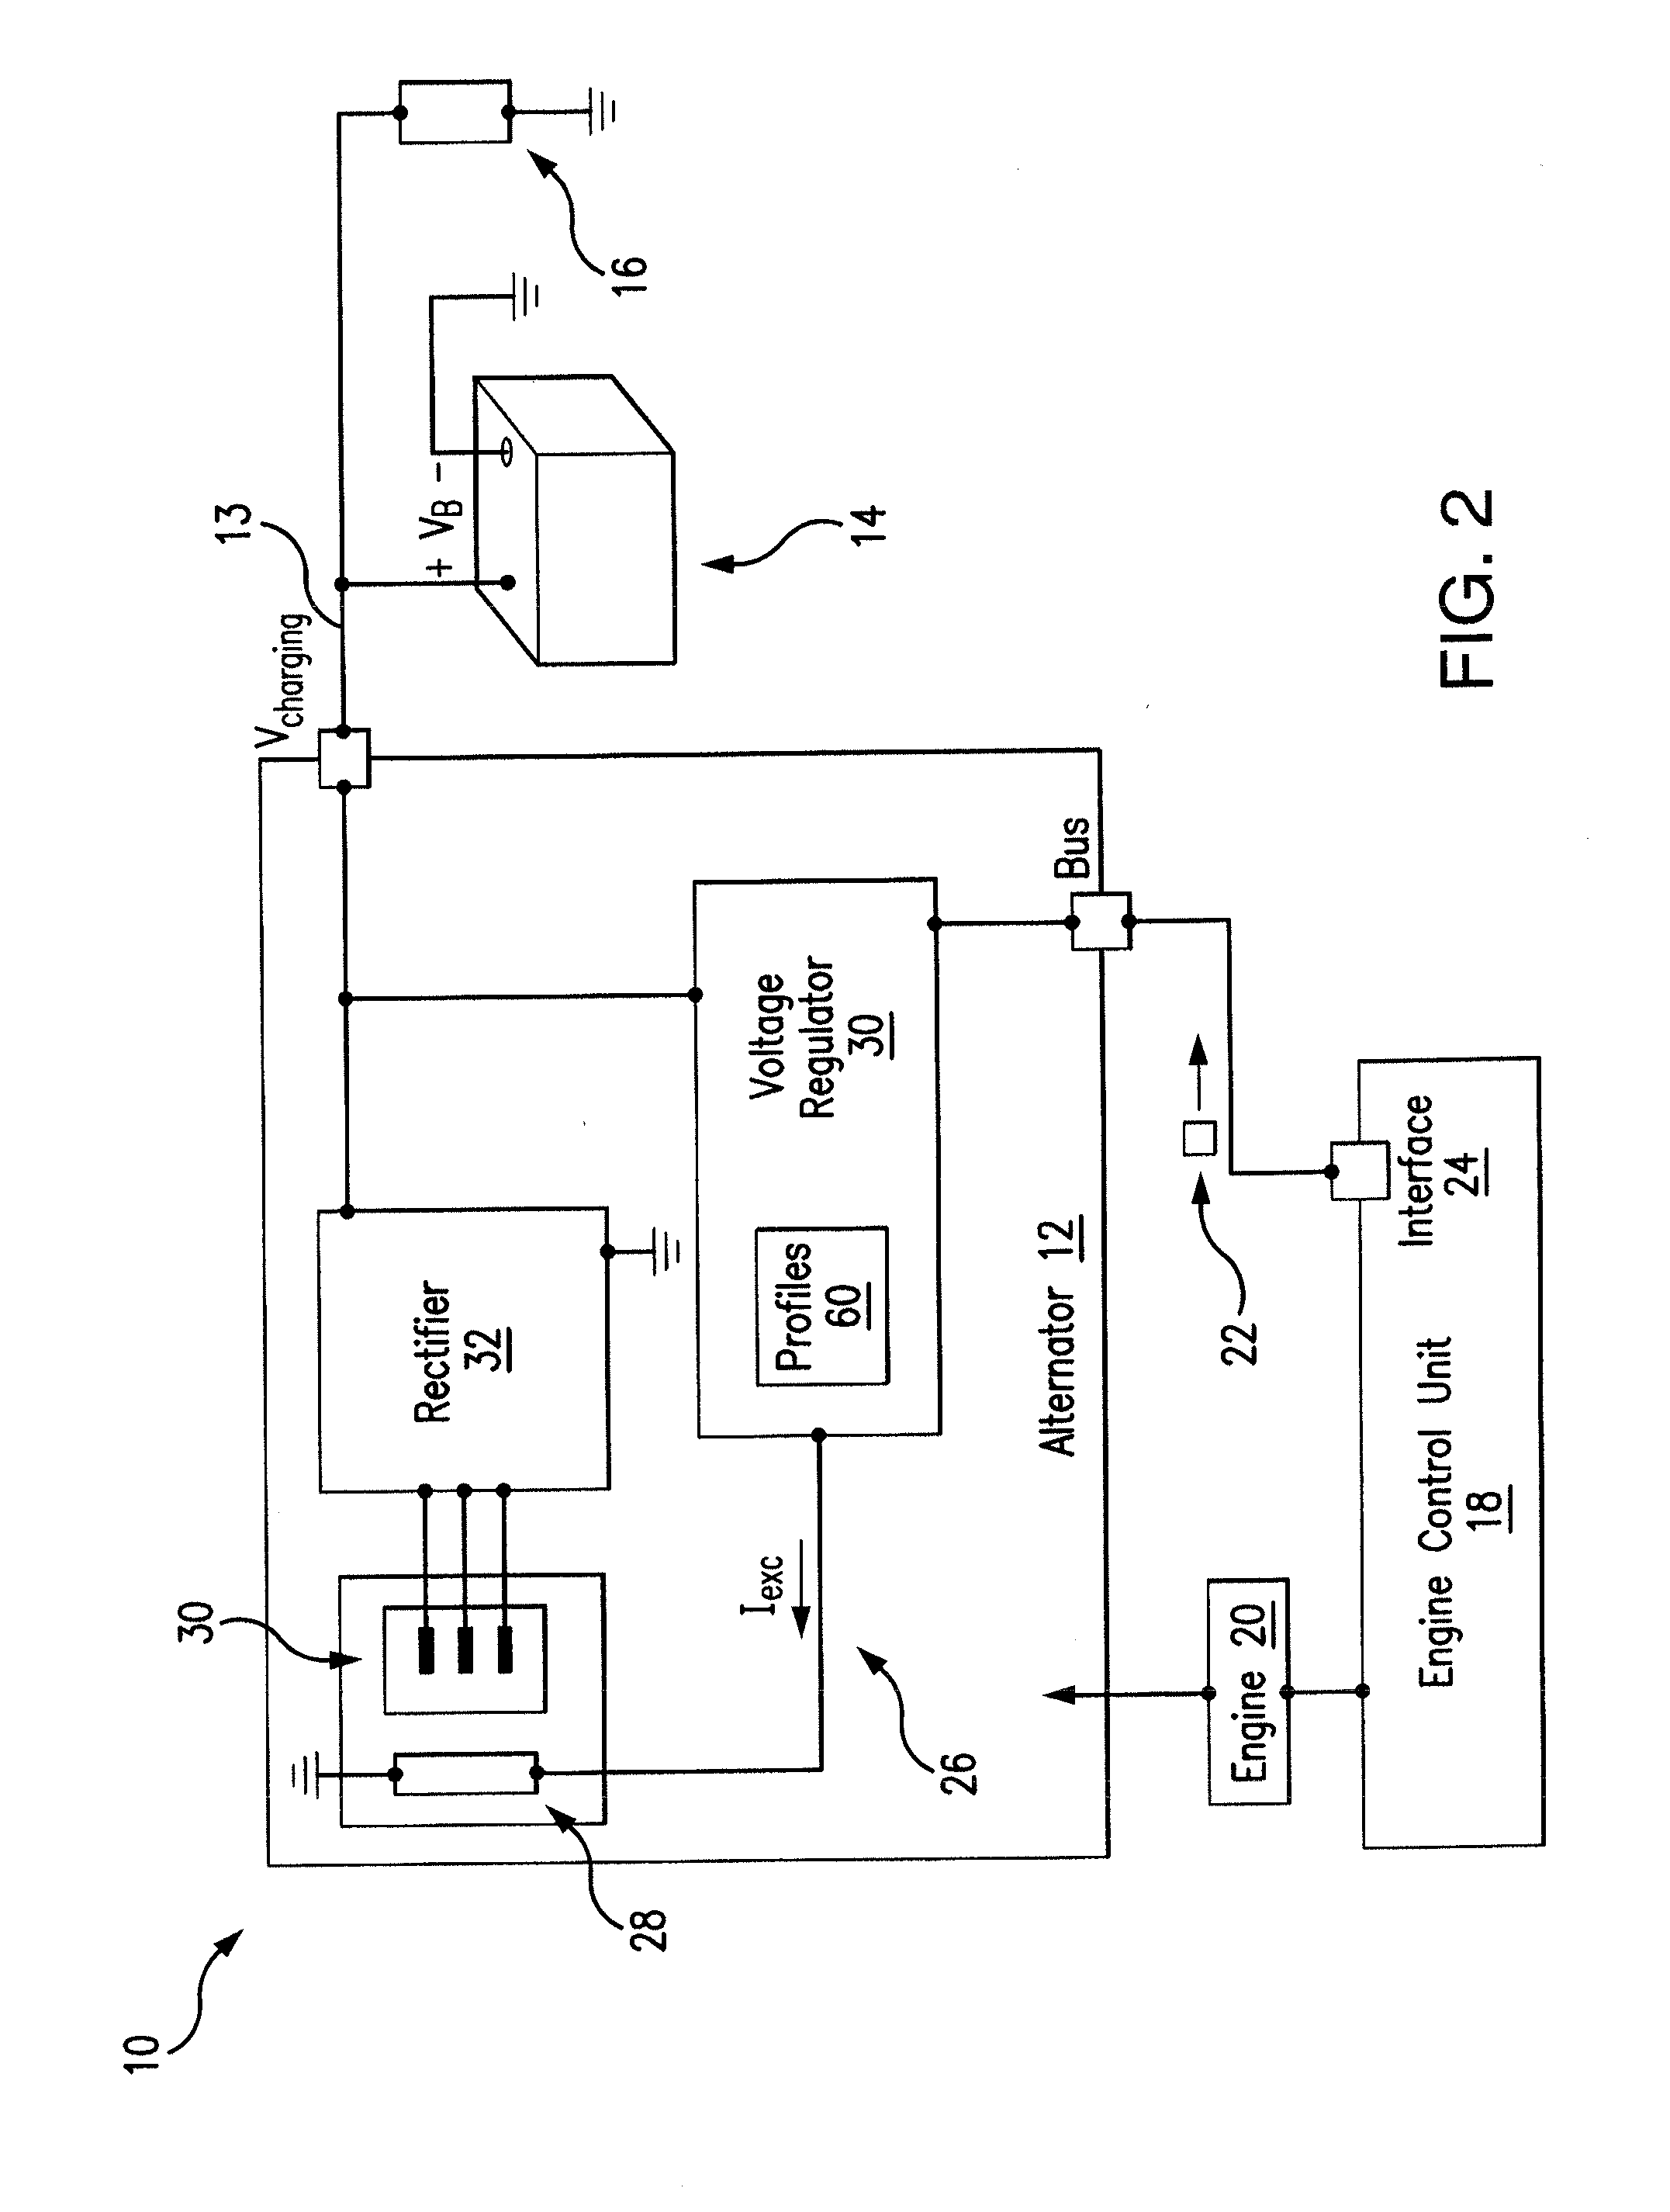 Alternator Control with Temperature-Dependent Safety Feature